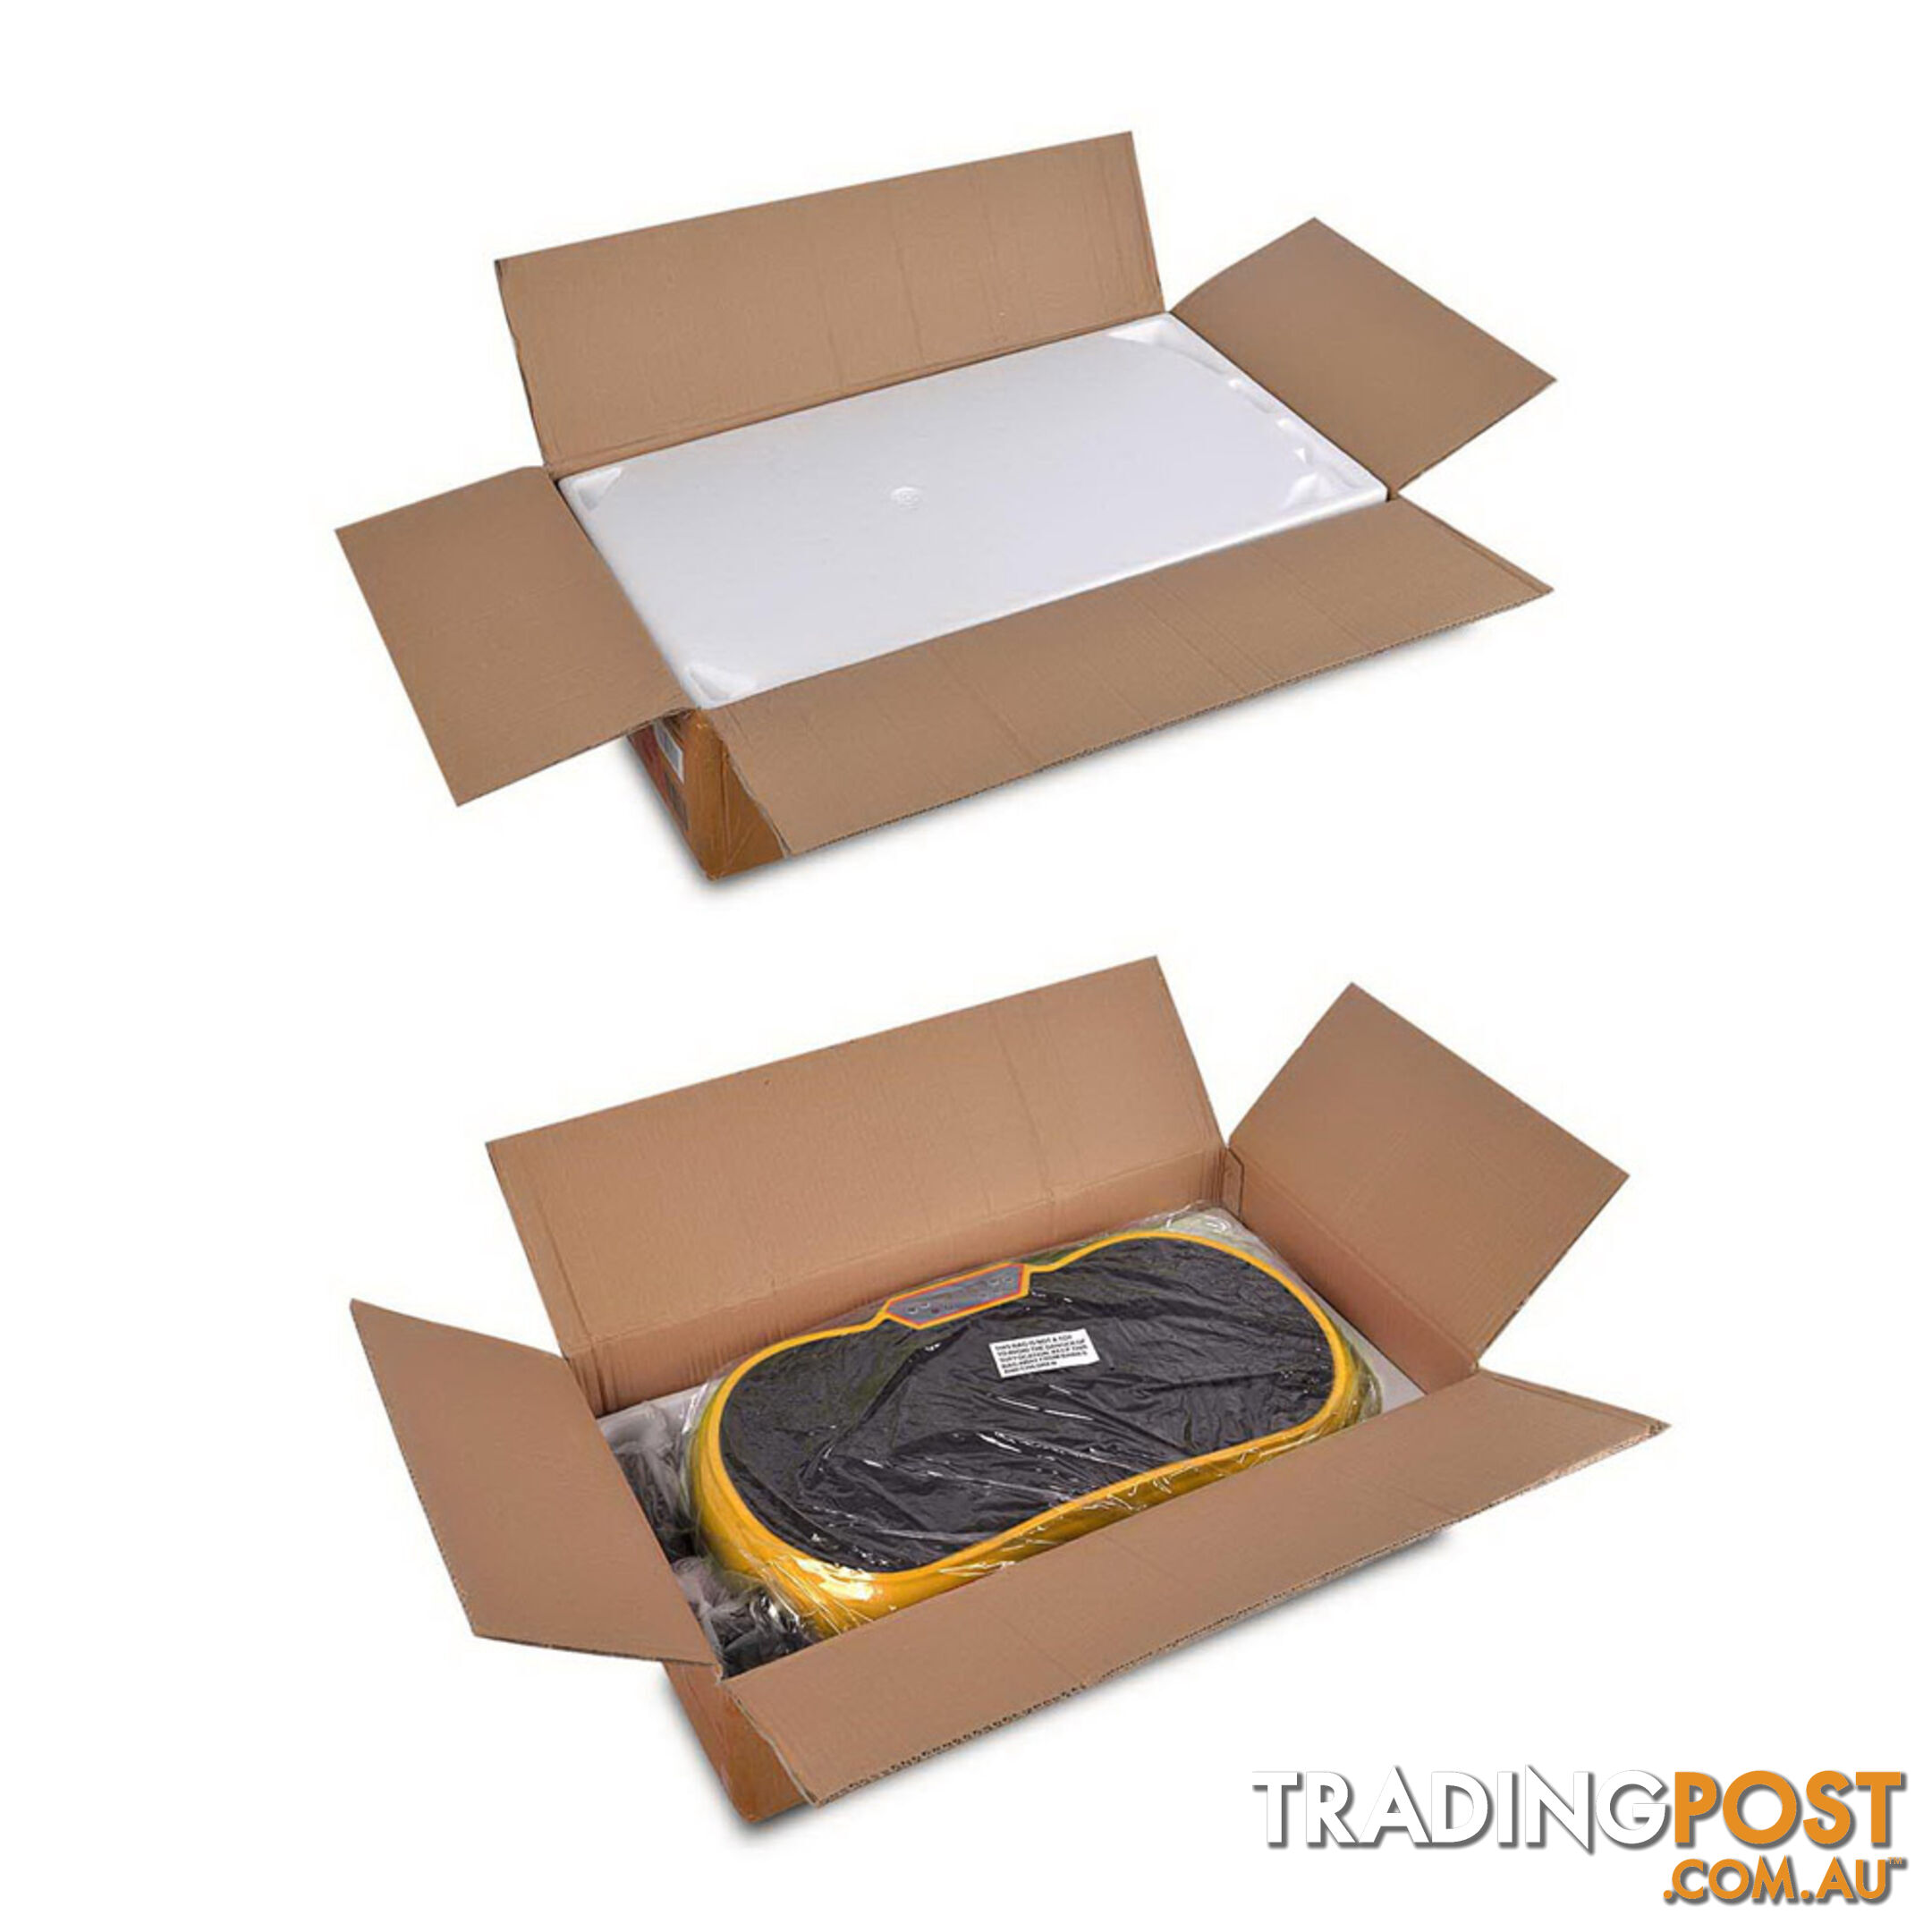 1000W Vibrating Plate with Roller Wheels - Gold